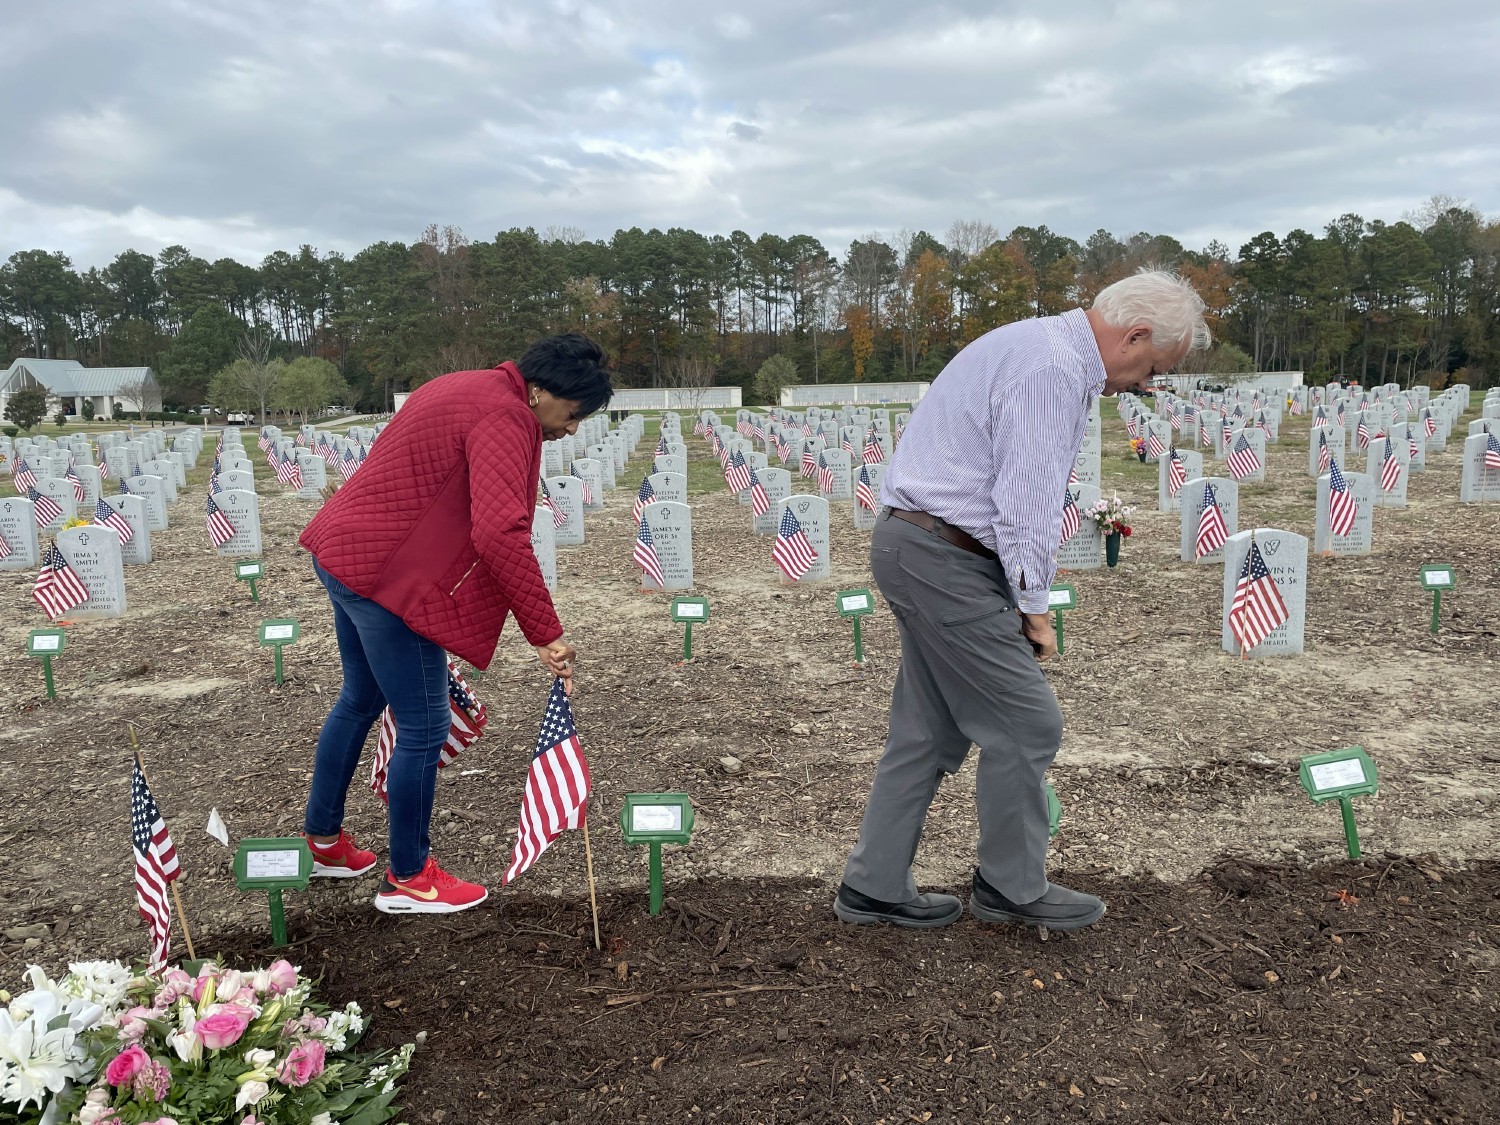 Associates placed flags on cemeteries on Veteran's Day to pay tribute to the men and women who served our country.